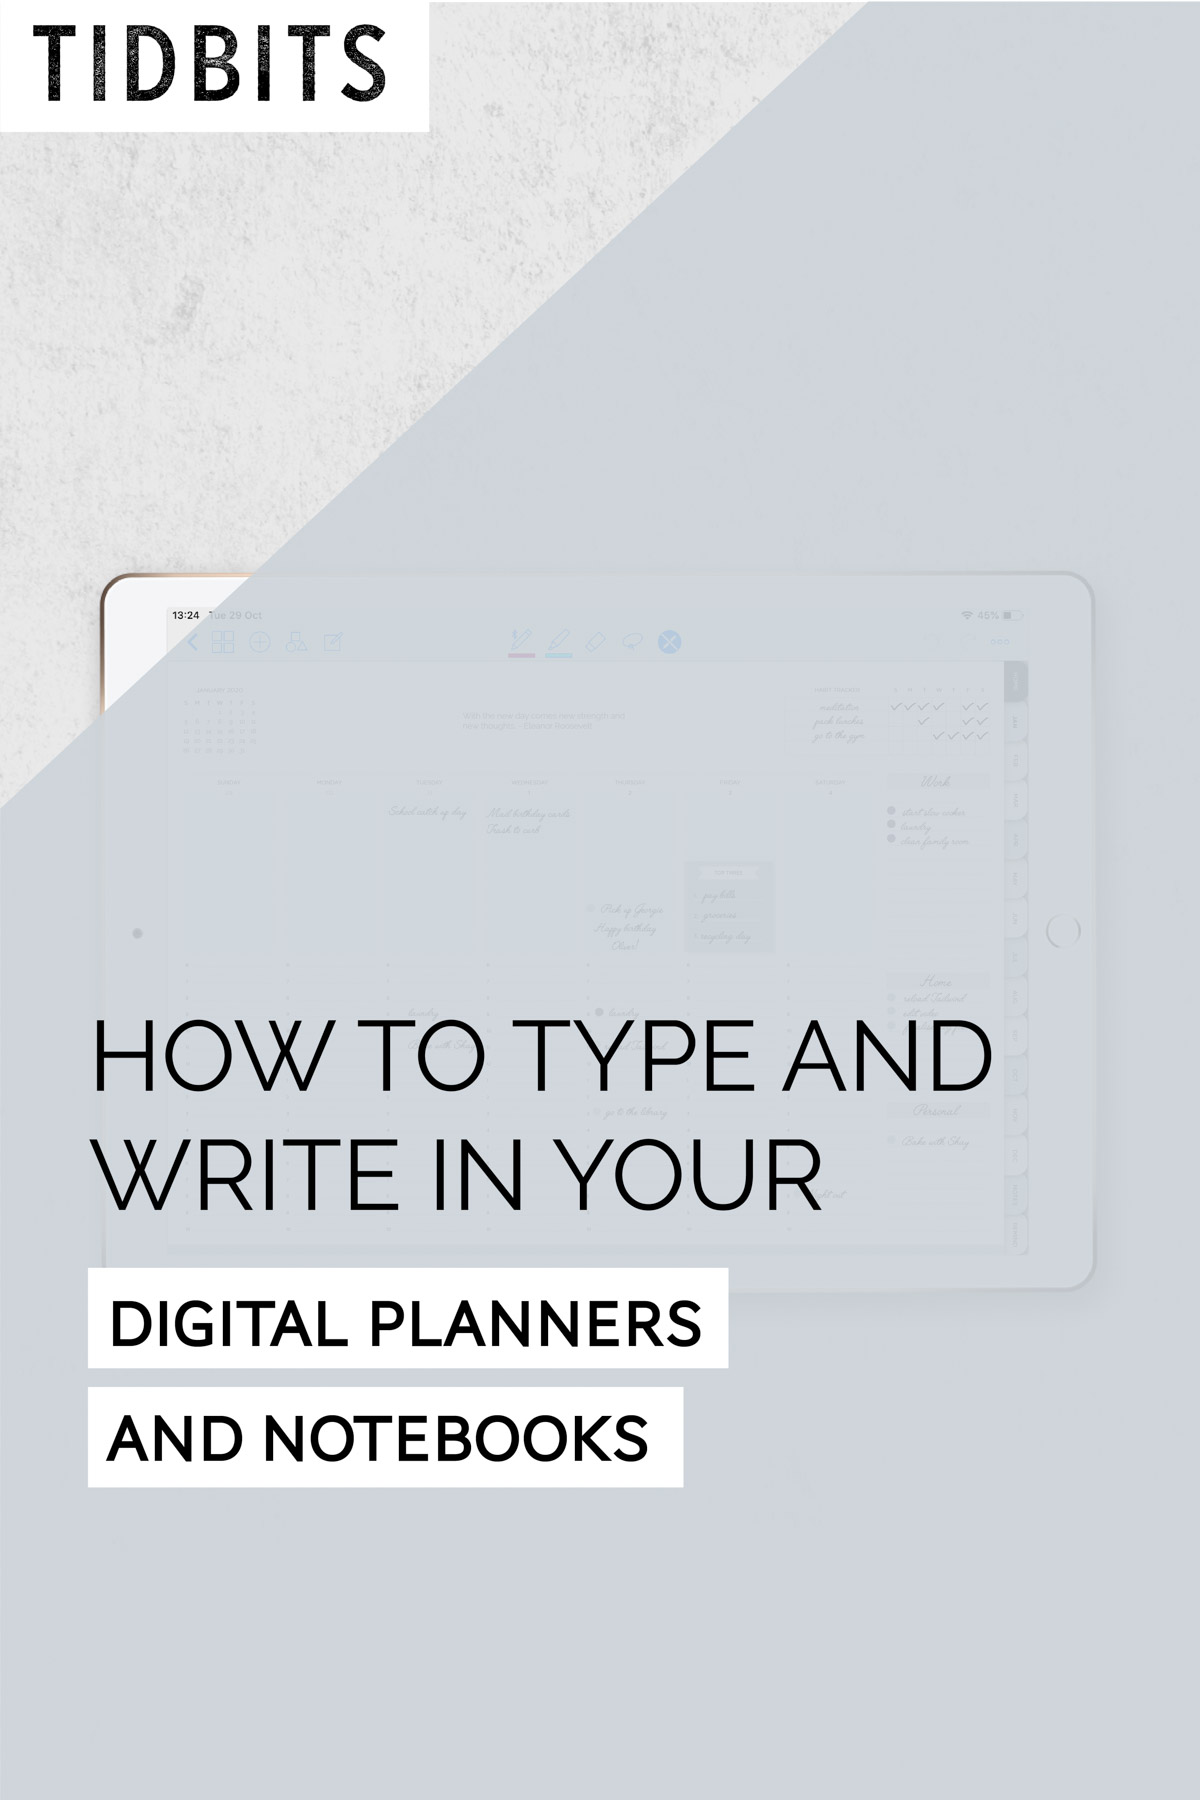 How to type and write in your digital planners and notebooks